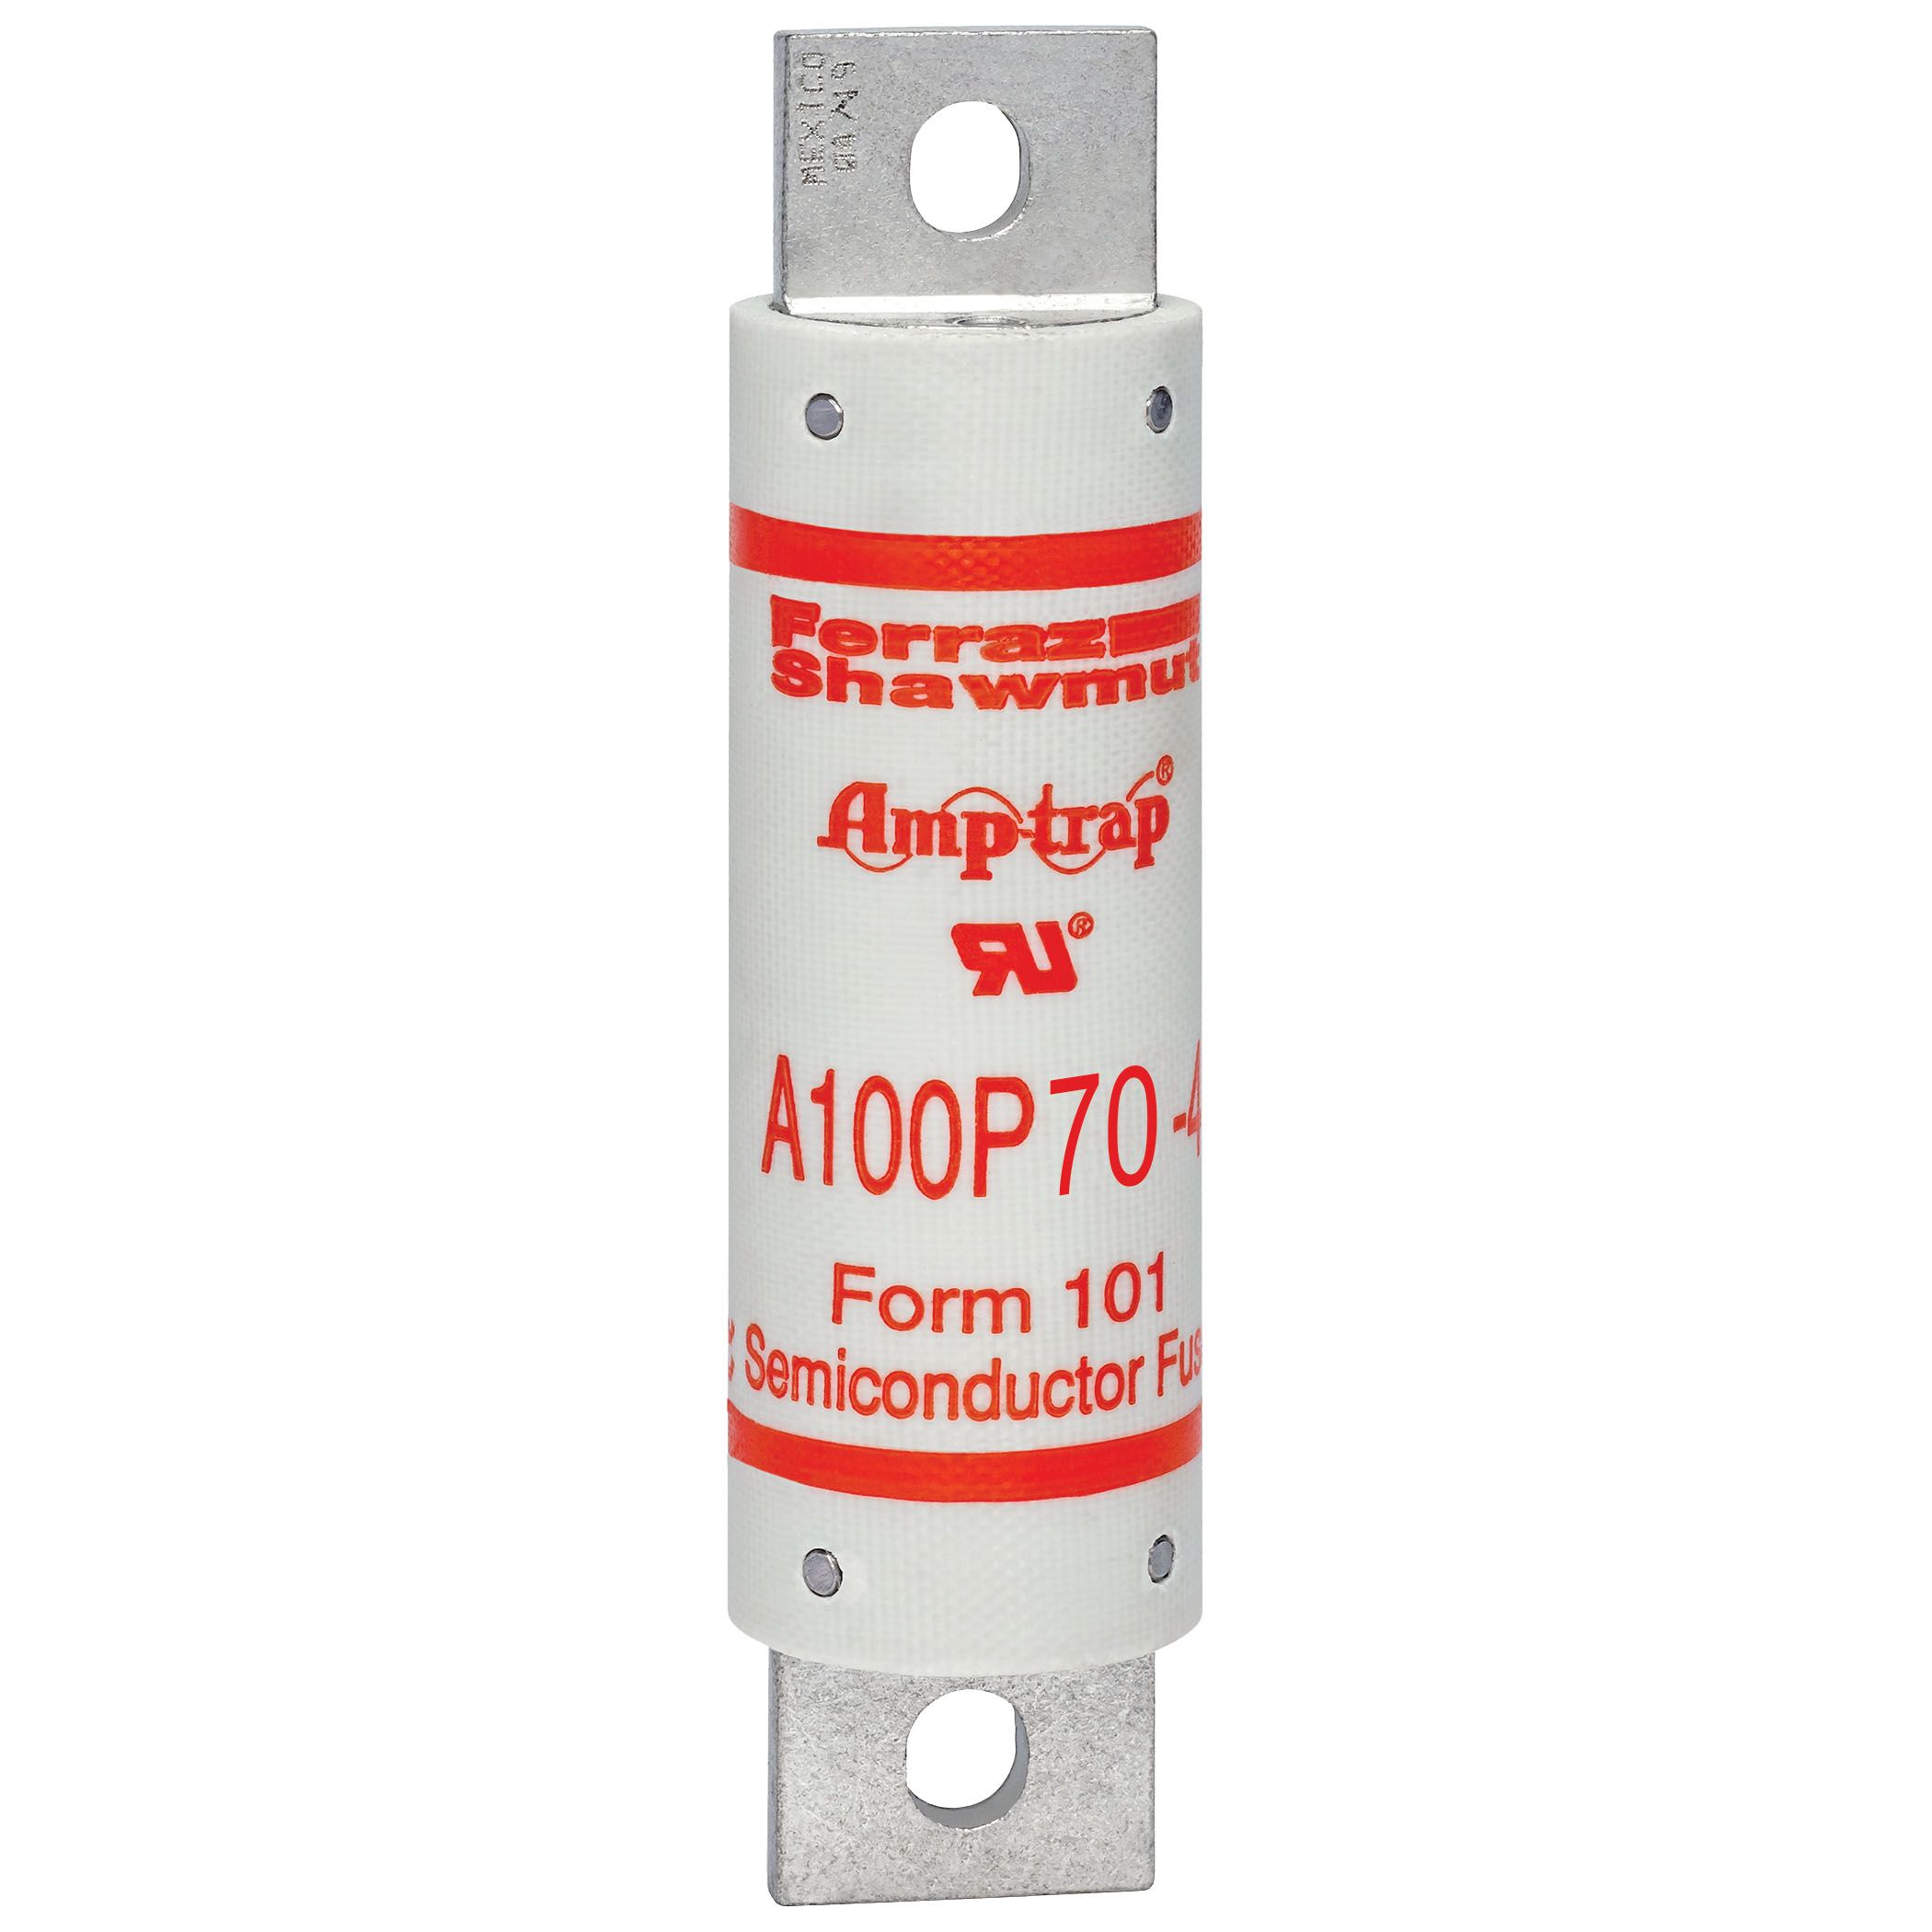 A100P70-4 - Semiconductor Fuse Amp-Trap® 1000V 70A aR High Speed A100P